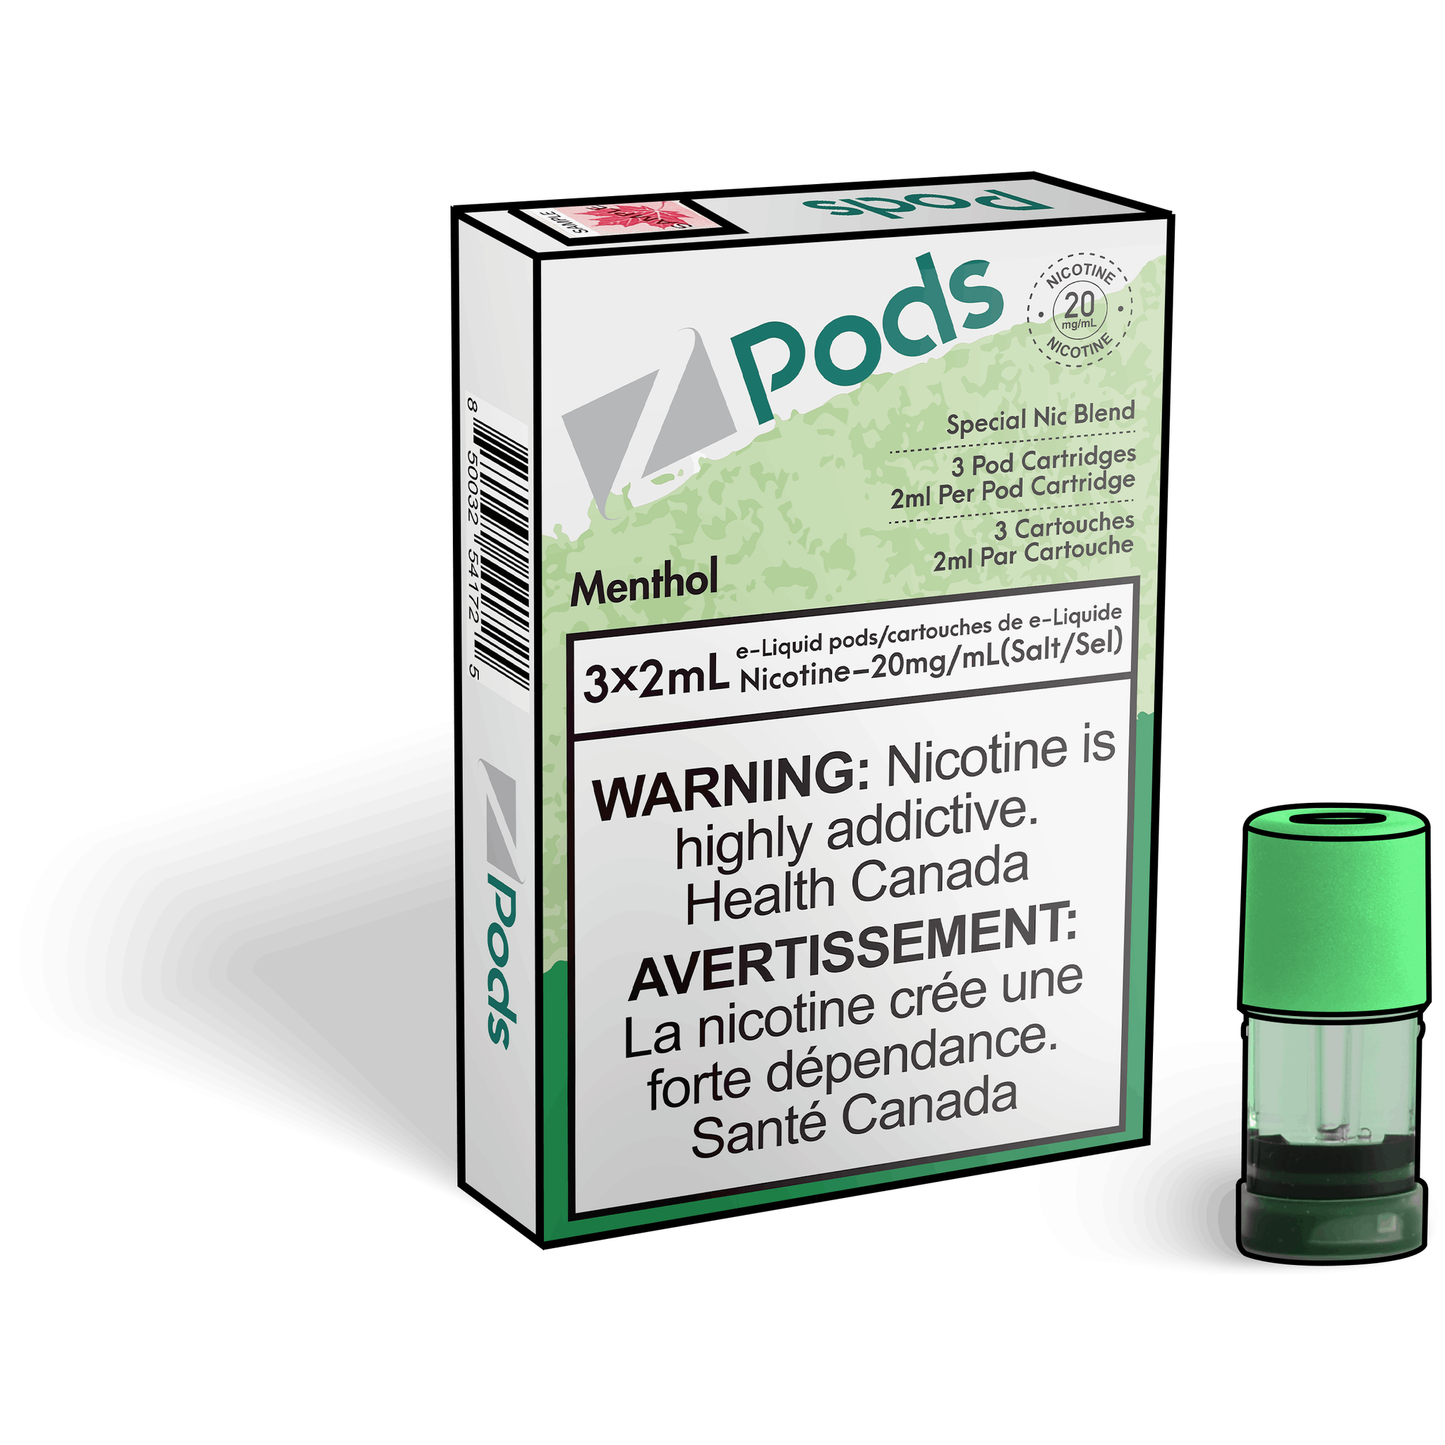 Zpods - Menthol